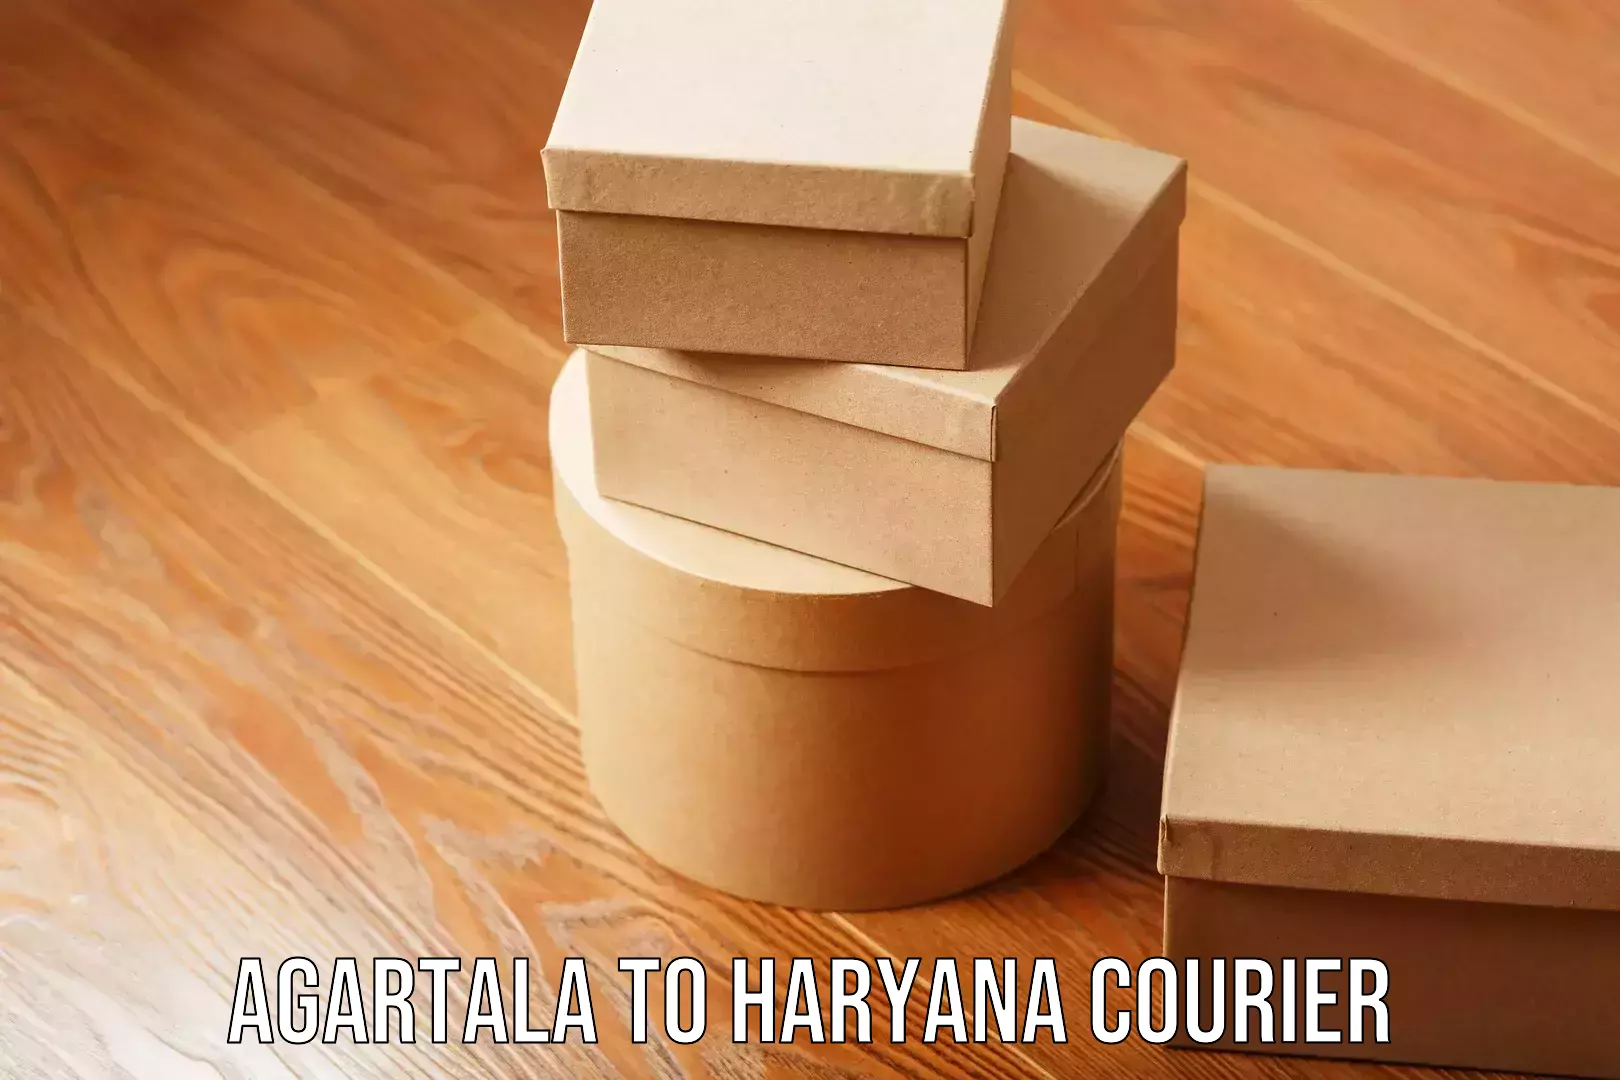 Nationwide delivery network Agartala to Haryana